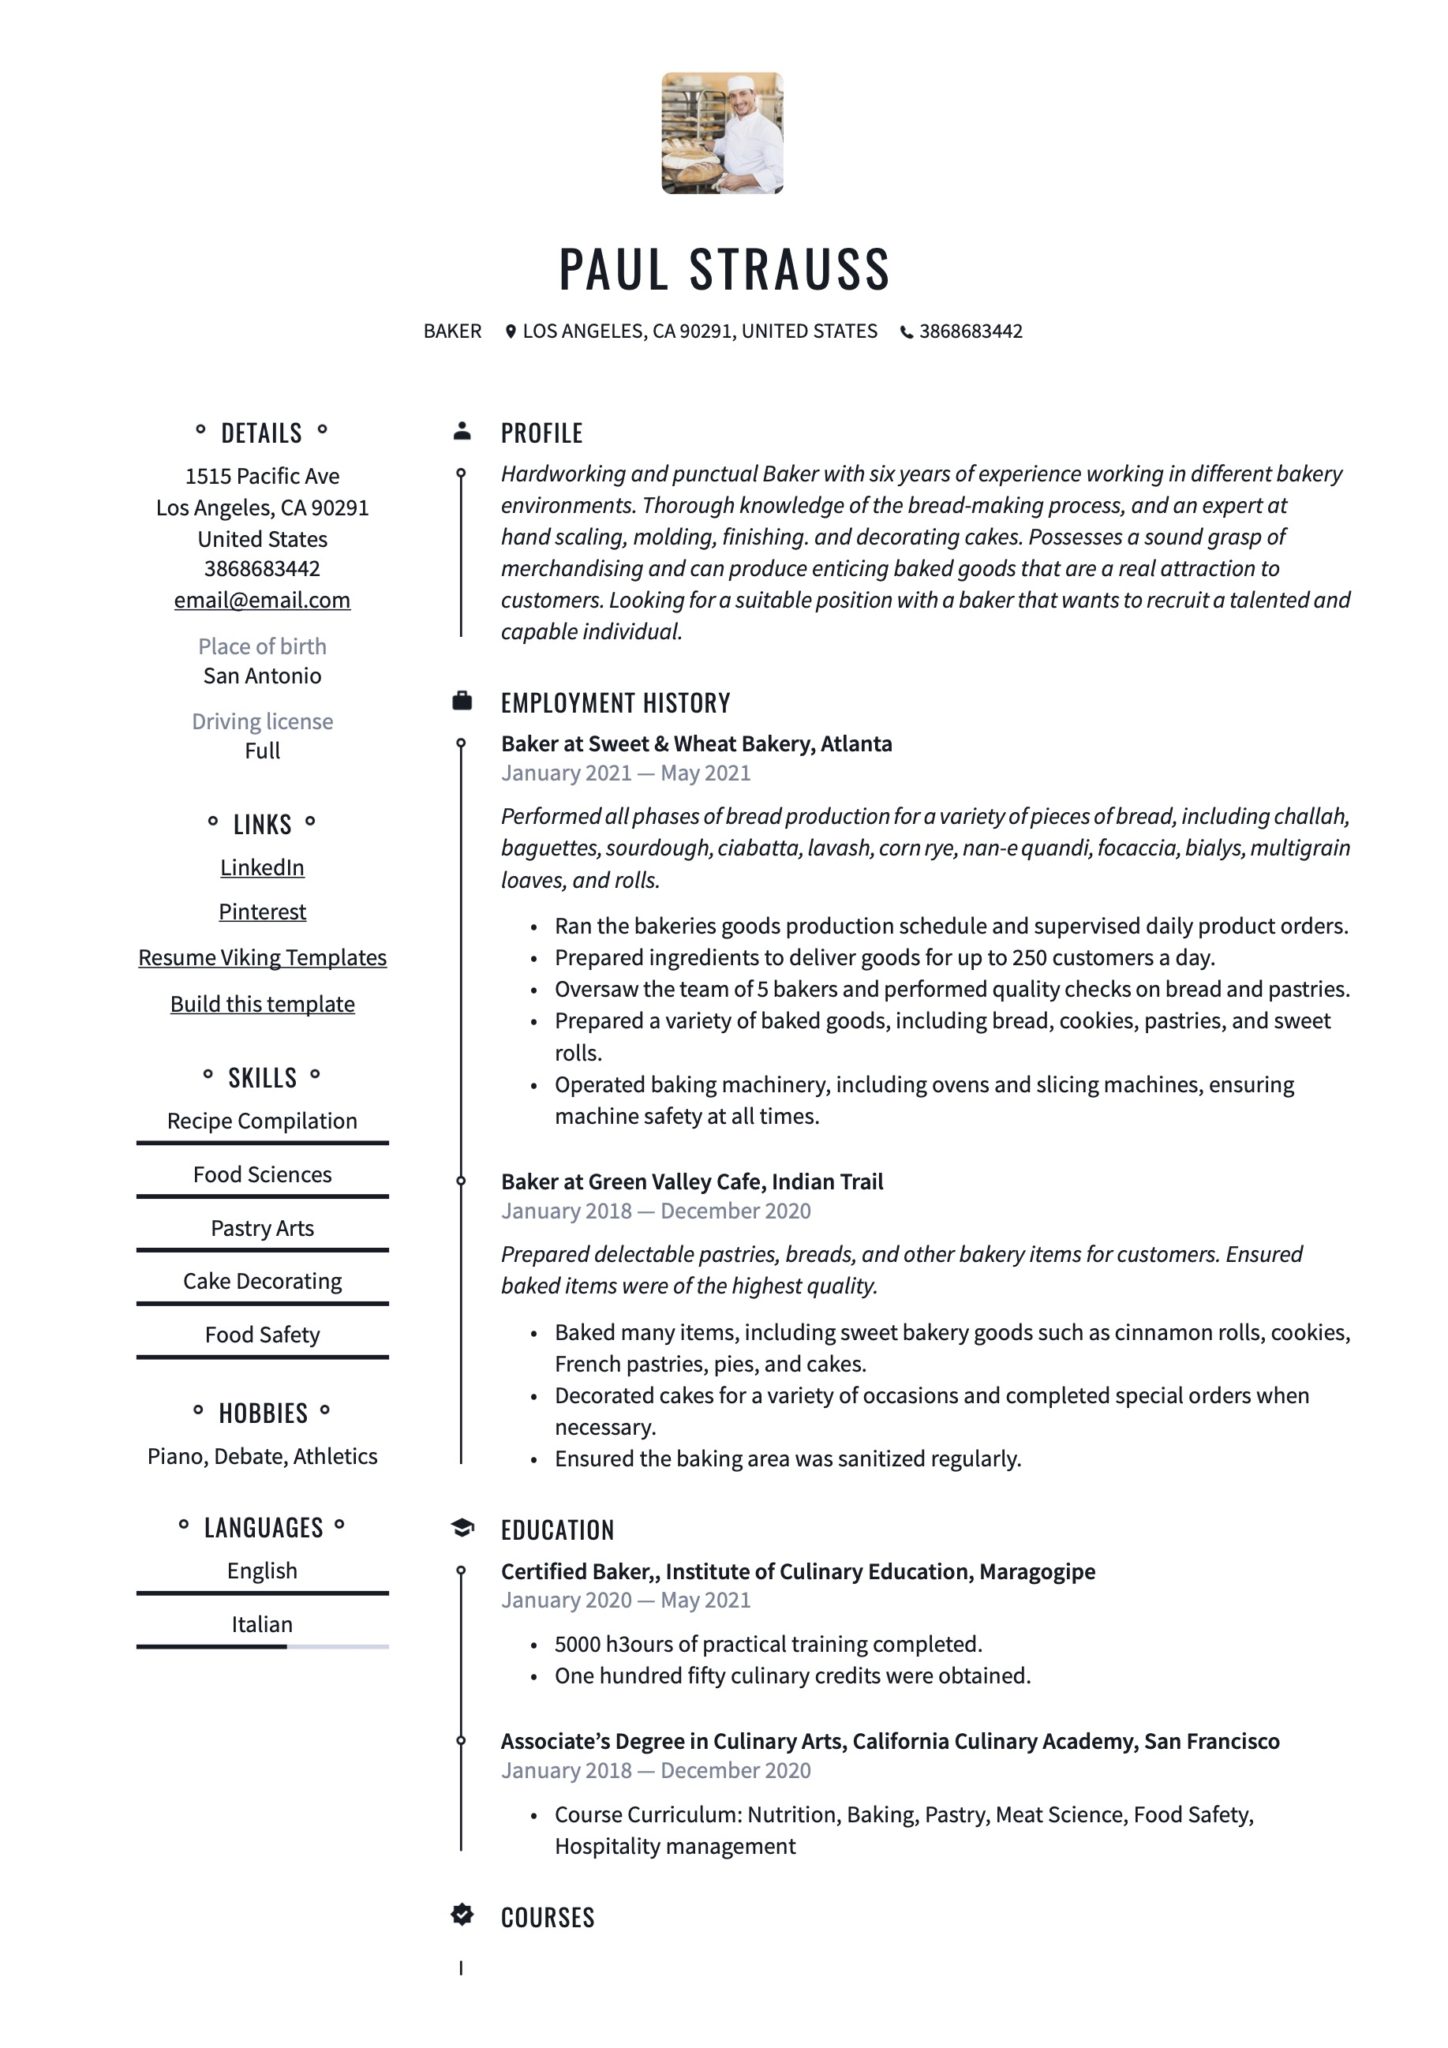 Professional Baker Resume Example